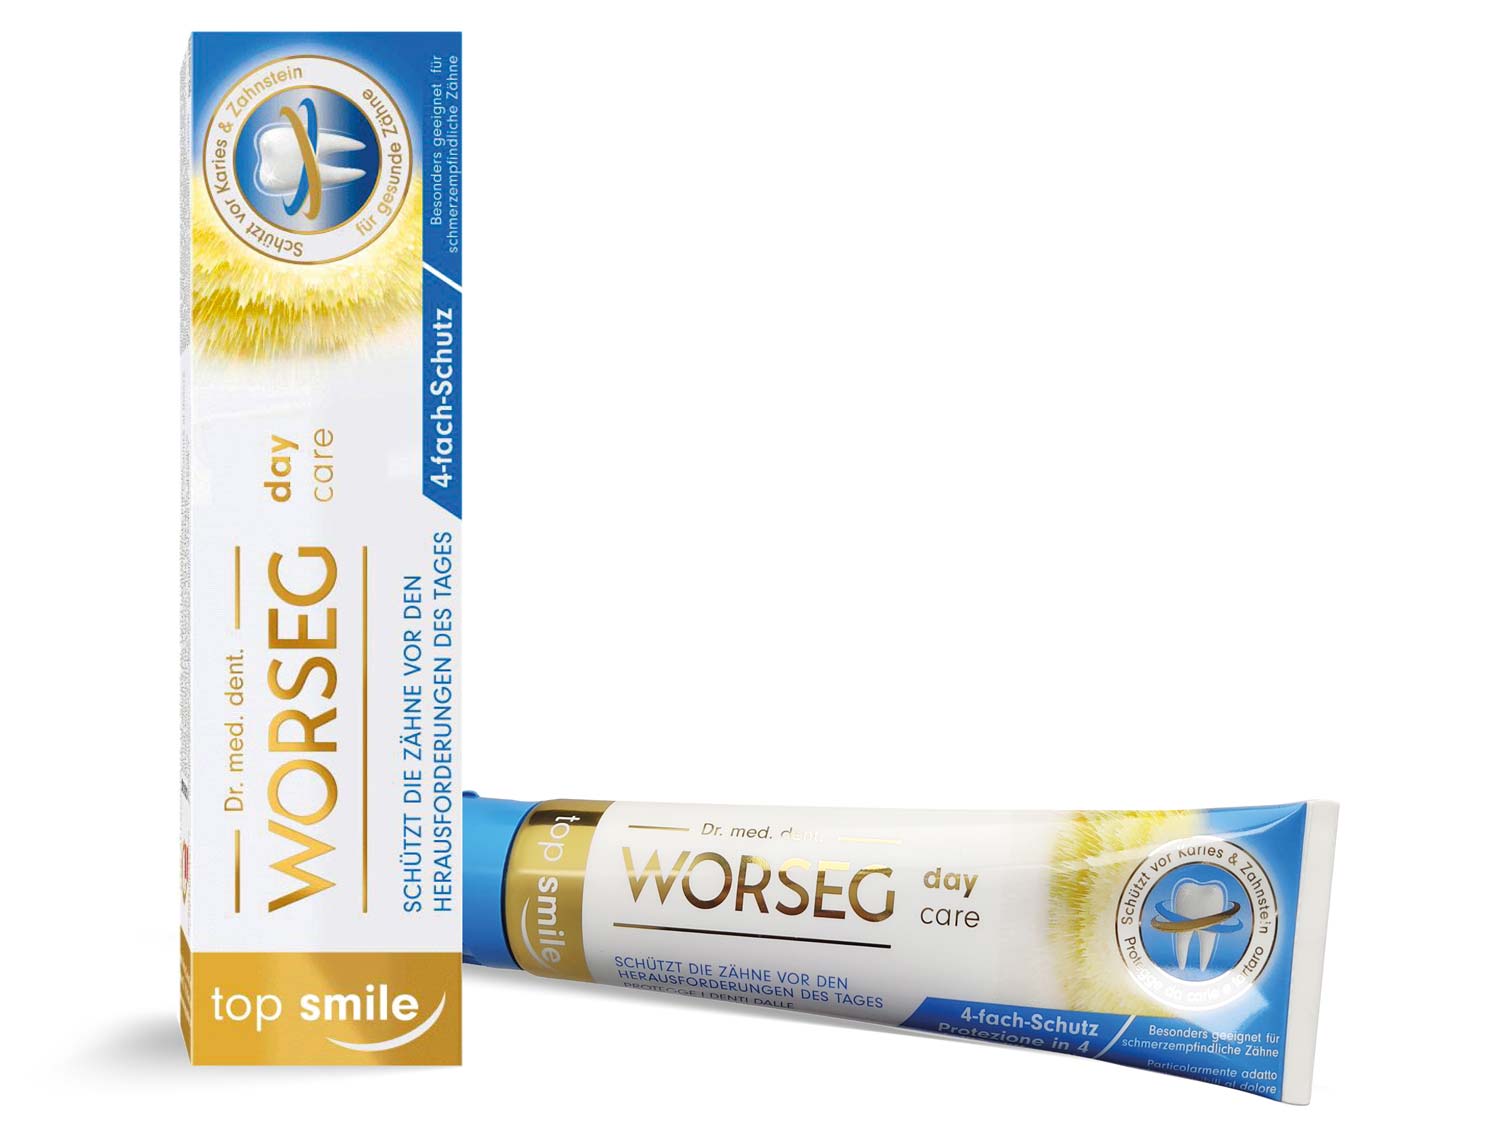 Packaging Design Worseg top smile day care